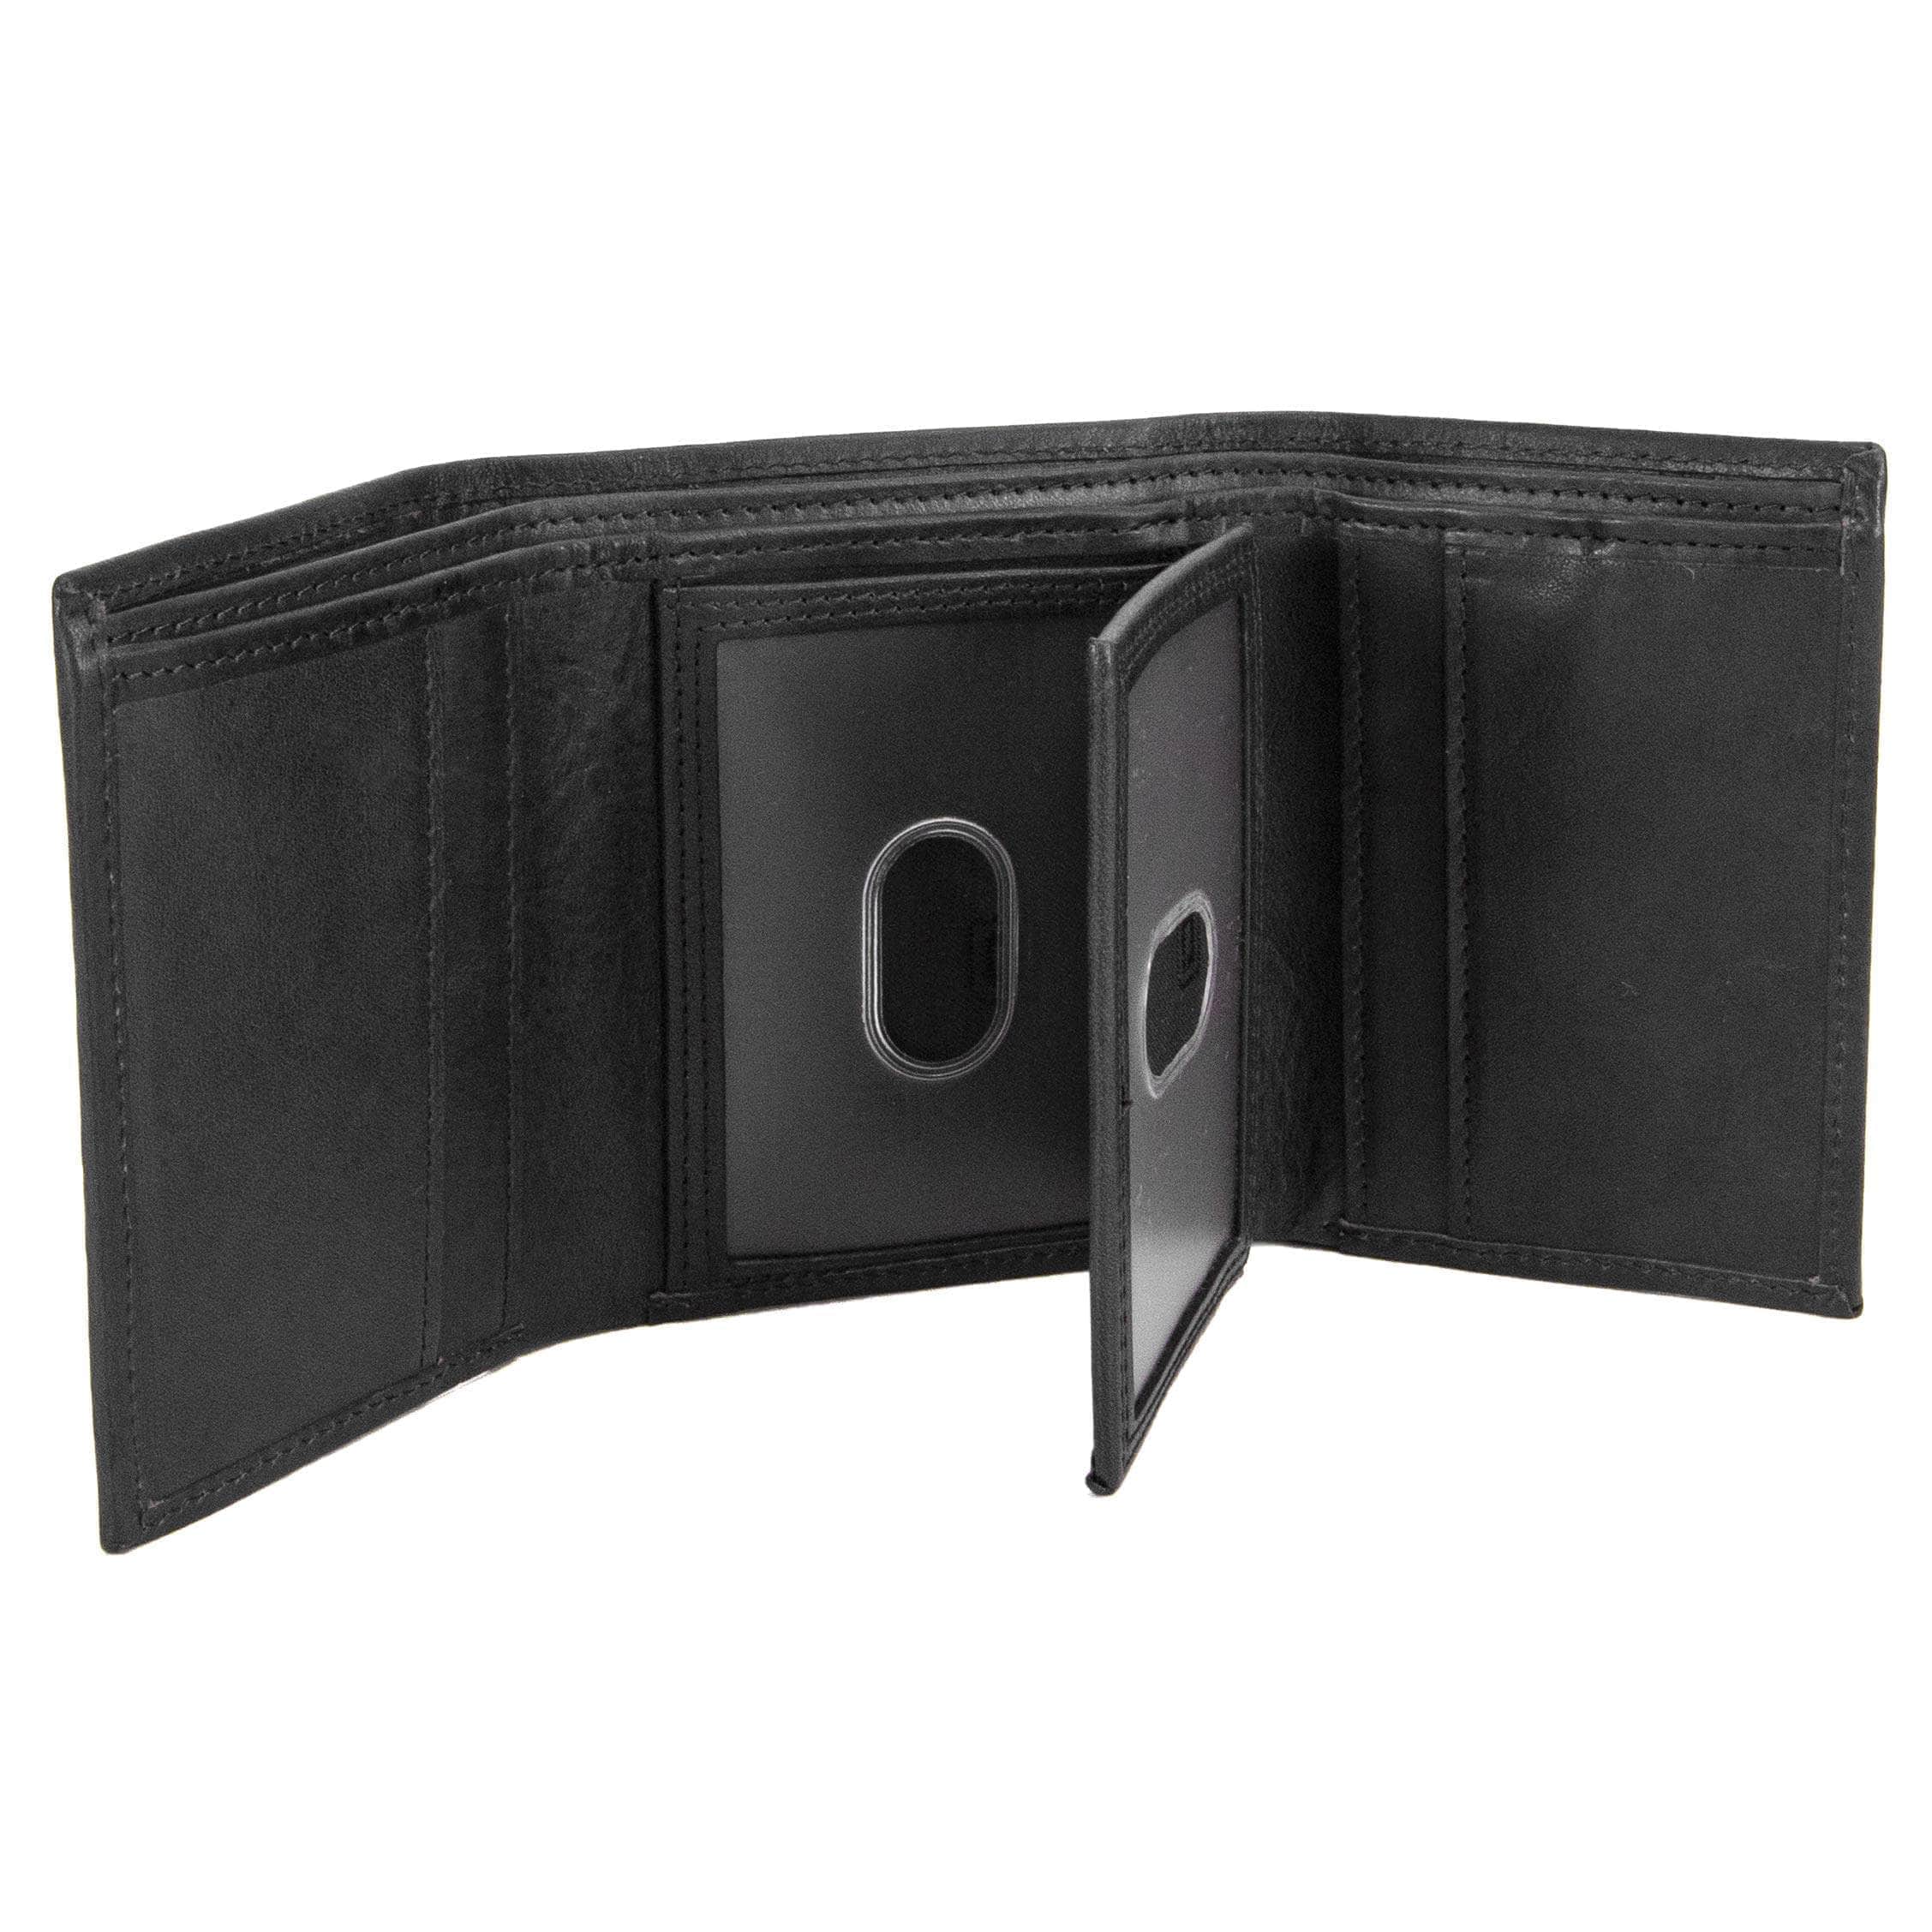 ID Stronghold Men's Wallet Italian Leather Trifold Wallet with 2 ID Windows